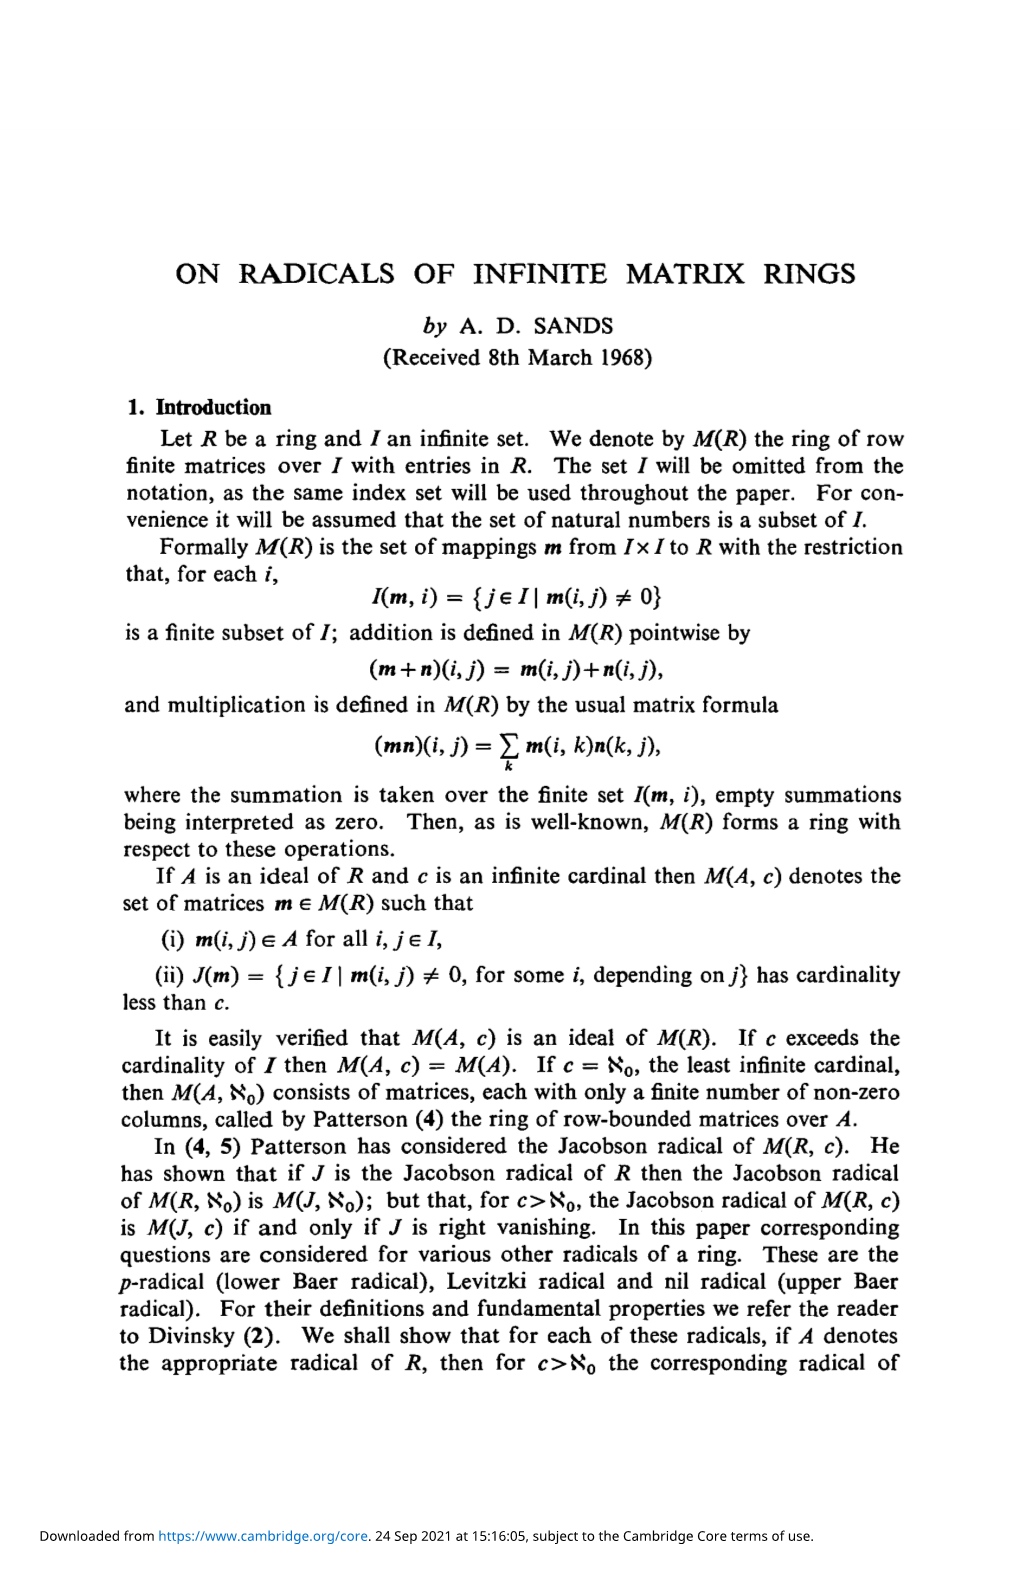 ON RADICALS of INFINITE MATRIX RINGS by A